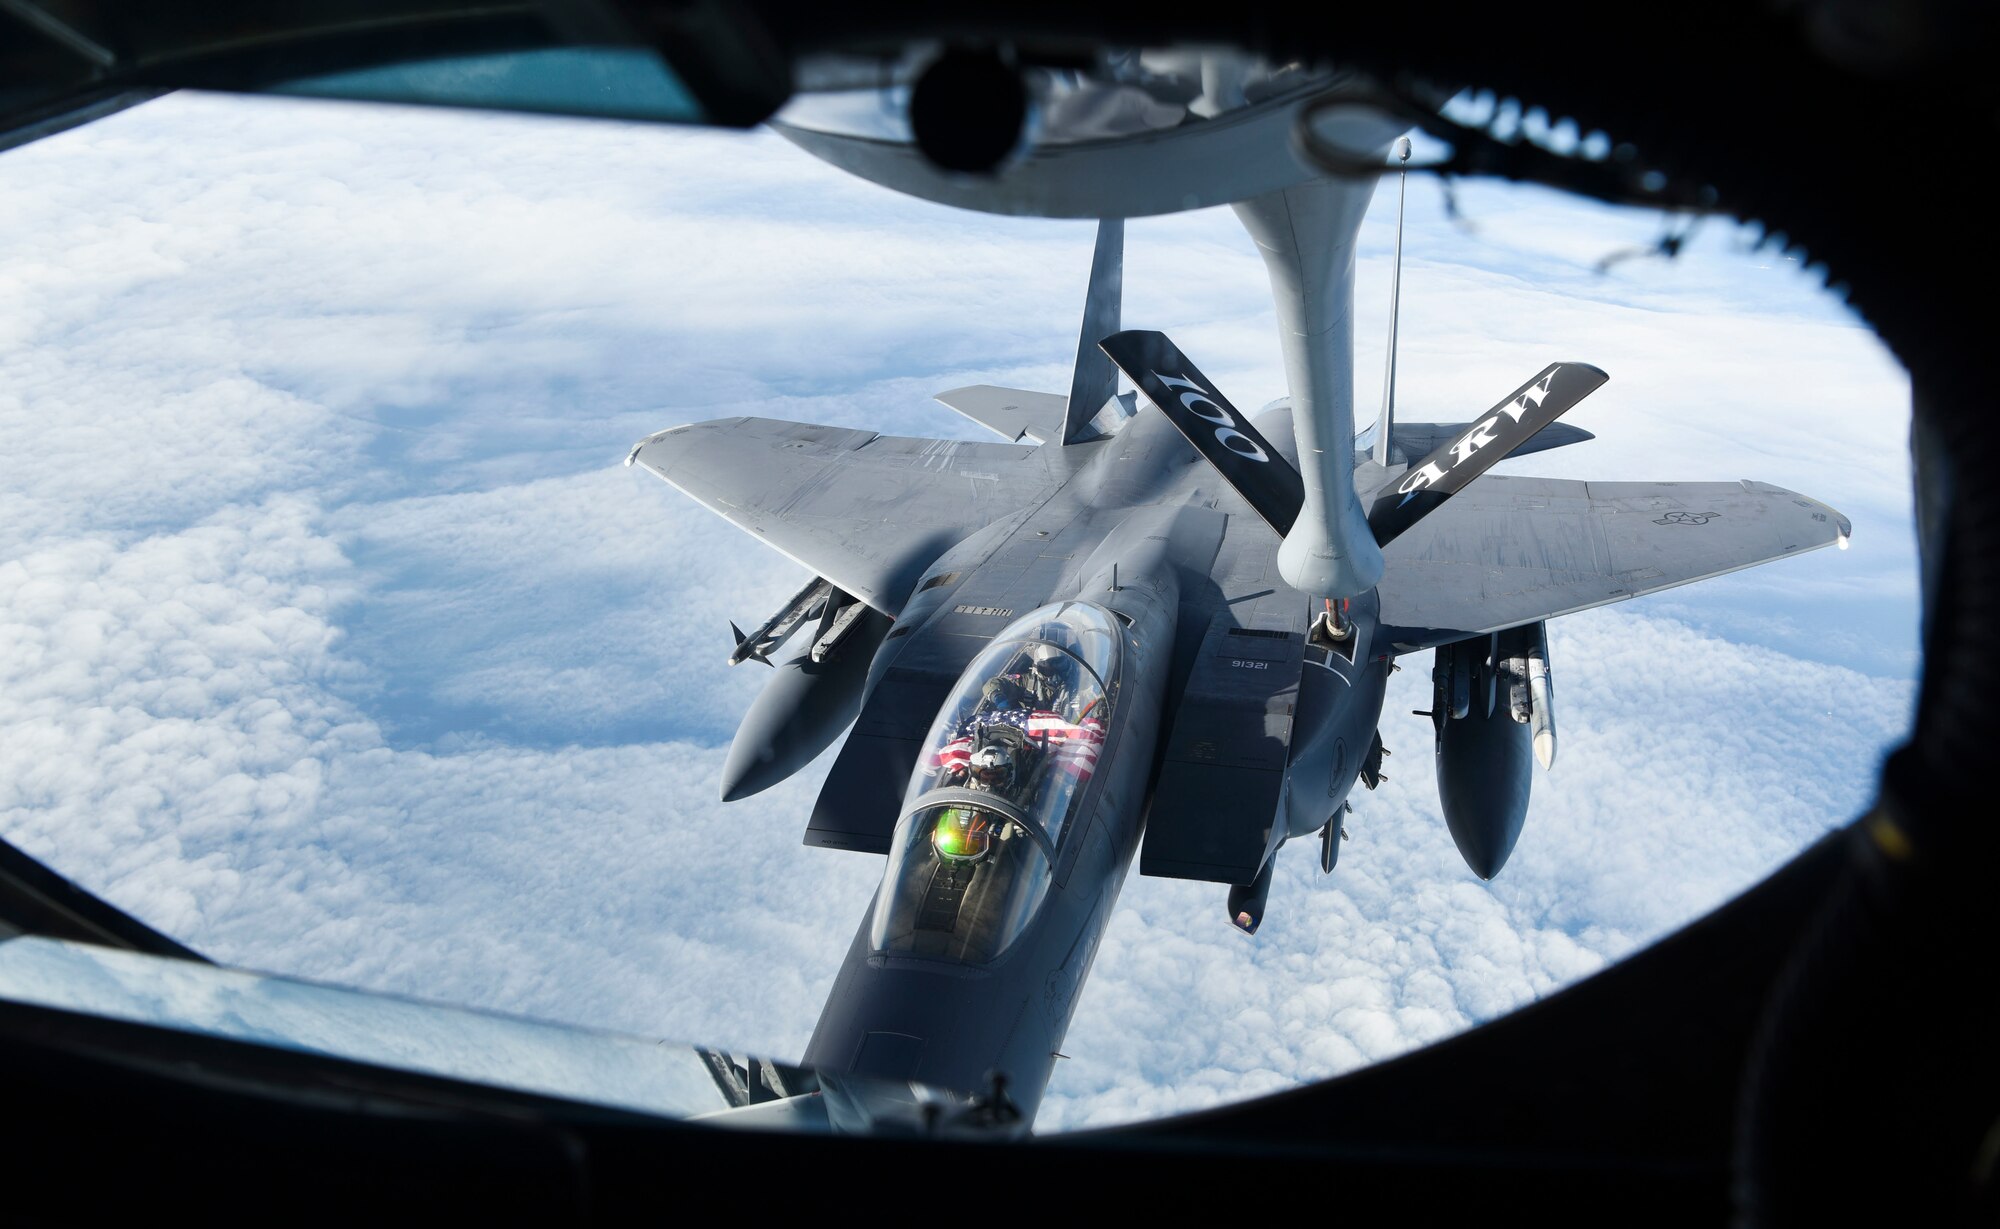 A U.S. Air Force F-15E Strike Eagle aircraft assigned to the 48th Fighter Wing, Royal Air Force Lakenheath, England, receives fuel from a KC-135 Stratotanker aircraft assigned to the 100th Air Refueling Wing from RAF Mildenhall, England, Feb. 24, 2021. Four F-15E fighter jets participated in the Estonian Independence Day fly-over, joining L-39 training jets and a M-28 transport aircraft of the Estonian Air Force, Eurofighter Typhoon fighter jets from the German Air Force deployed to Estonia as part of the Baltic Air Policing Mission, and Eurofighter Typhoon fighter jets from the Italian Air Force deployed as part of the Baltic Air Policing Mission in Lithuania. (U.S. Air Force Photo by Airman 1st Class David C Busby)